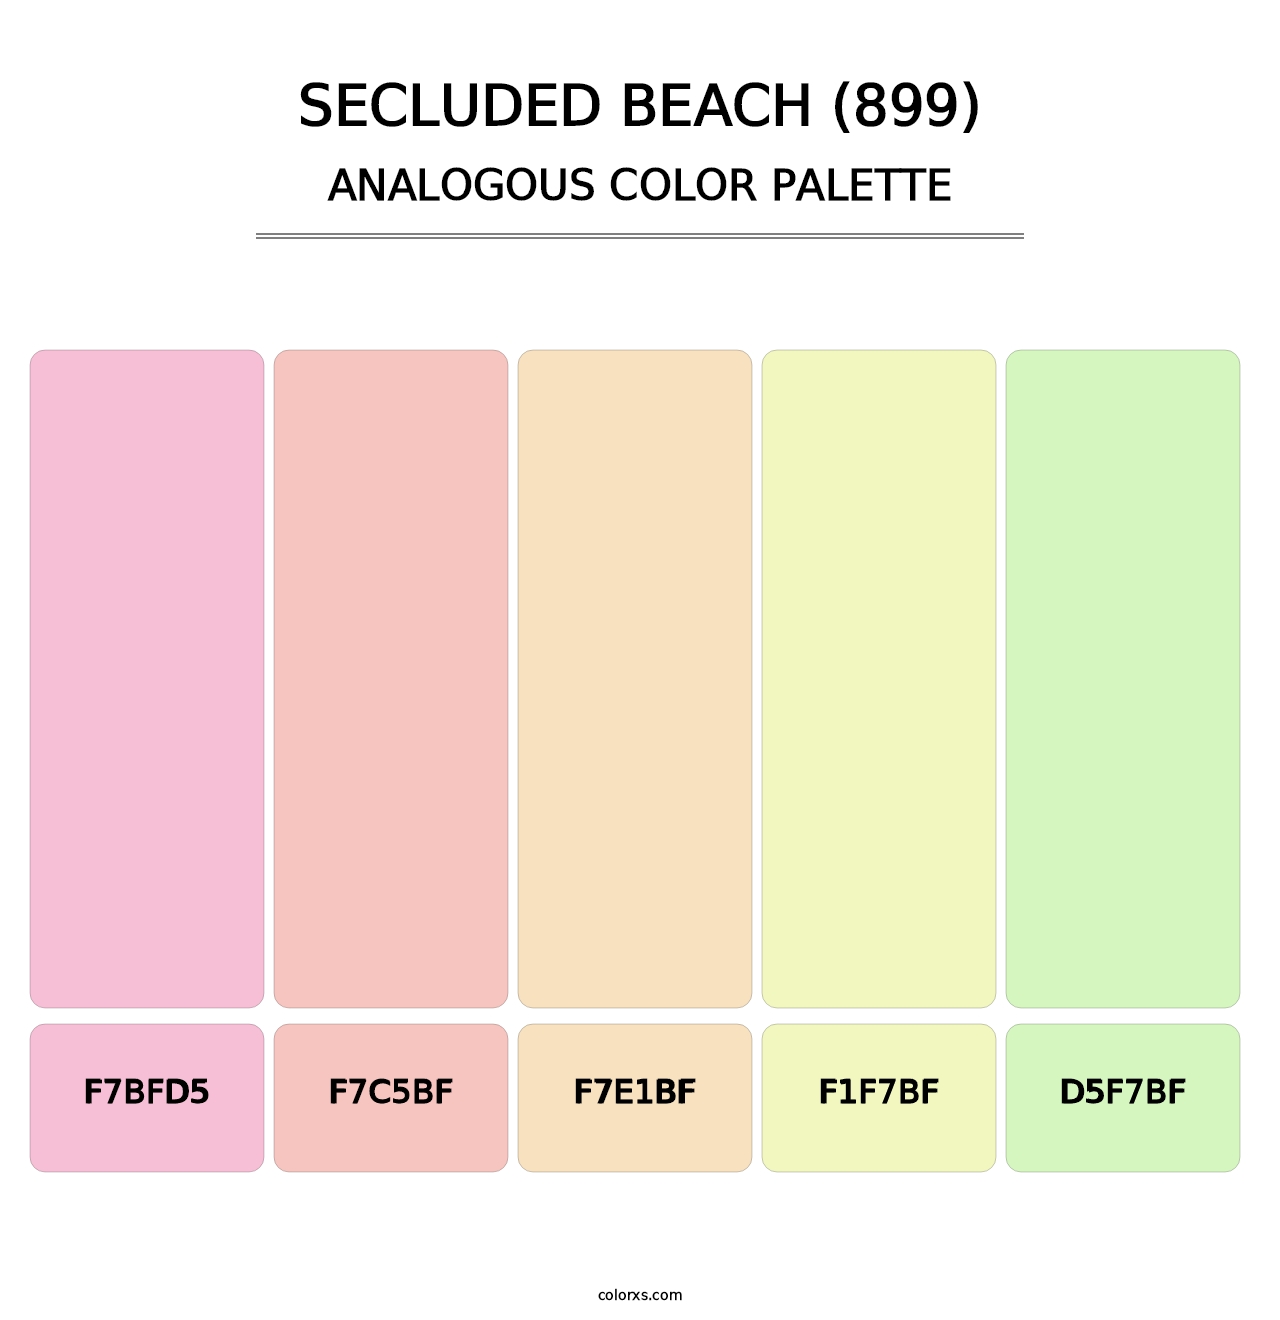 Secluded Beach (899) - Analogous Color Palette